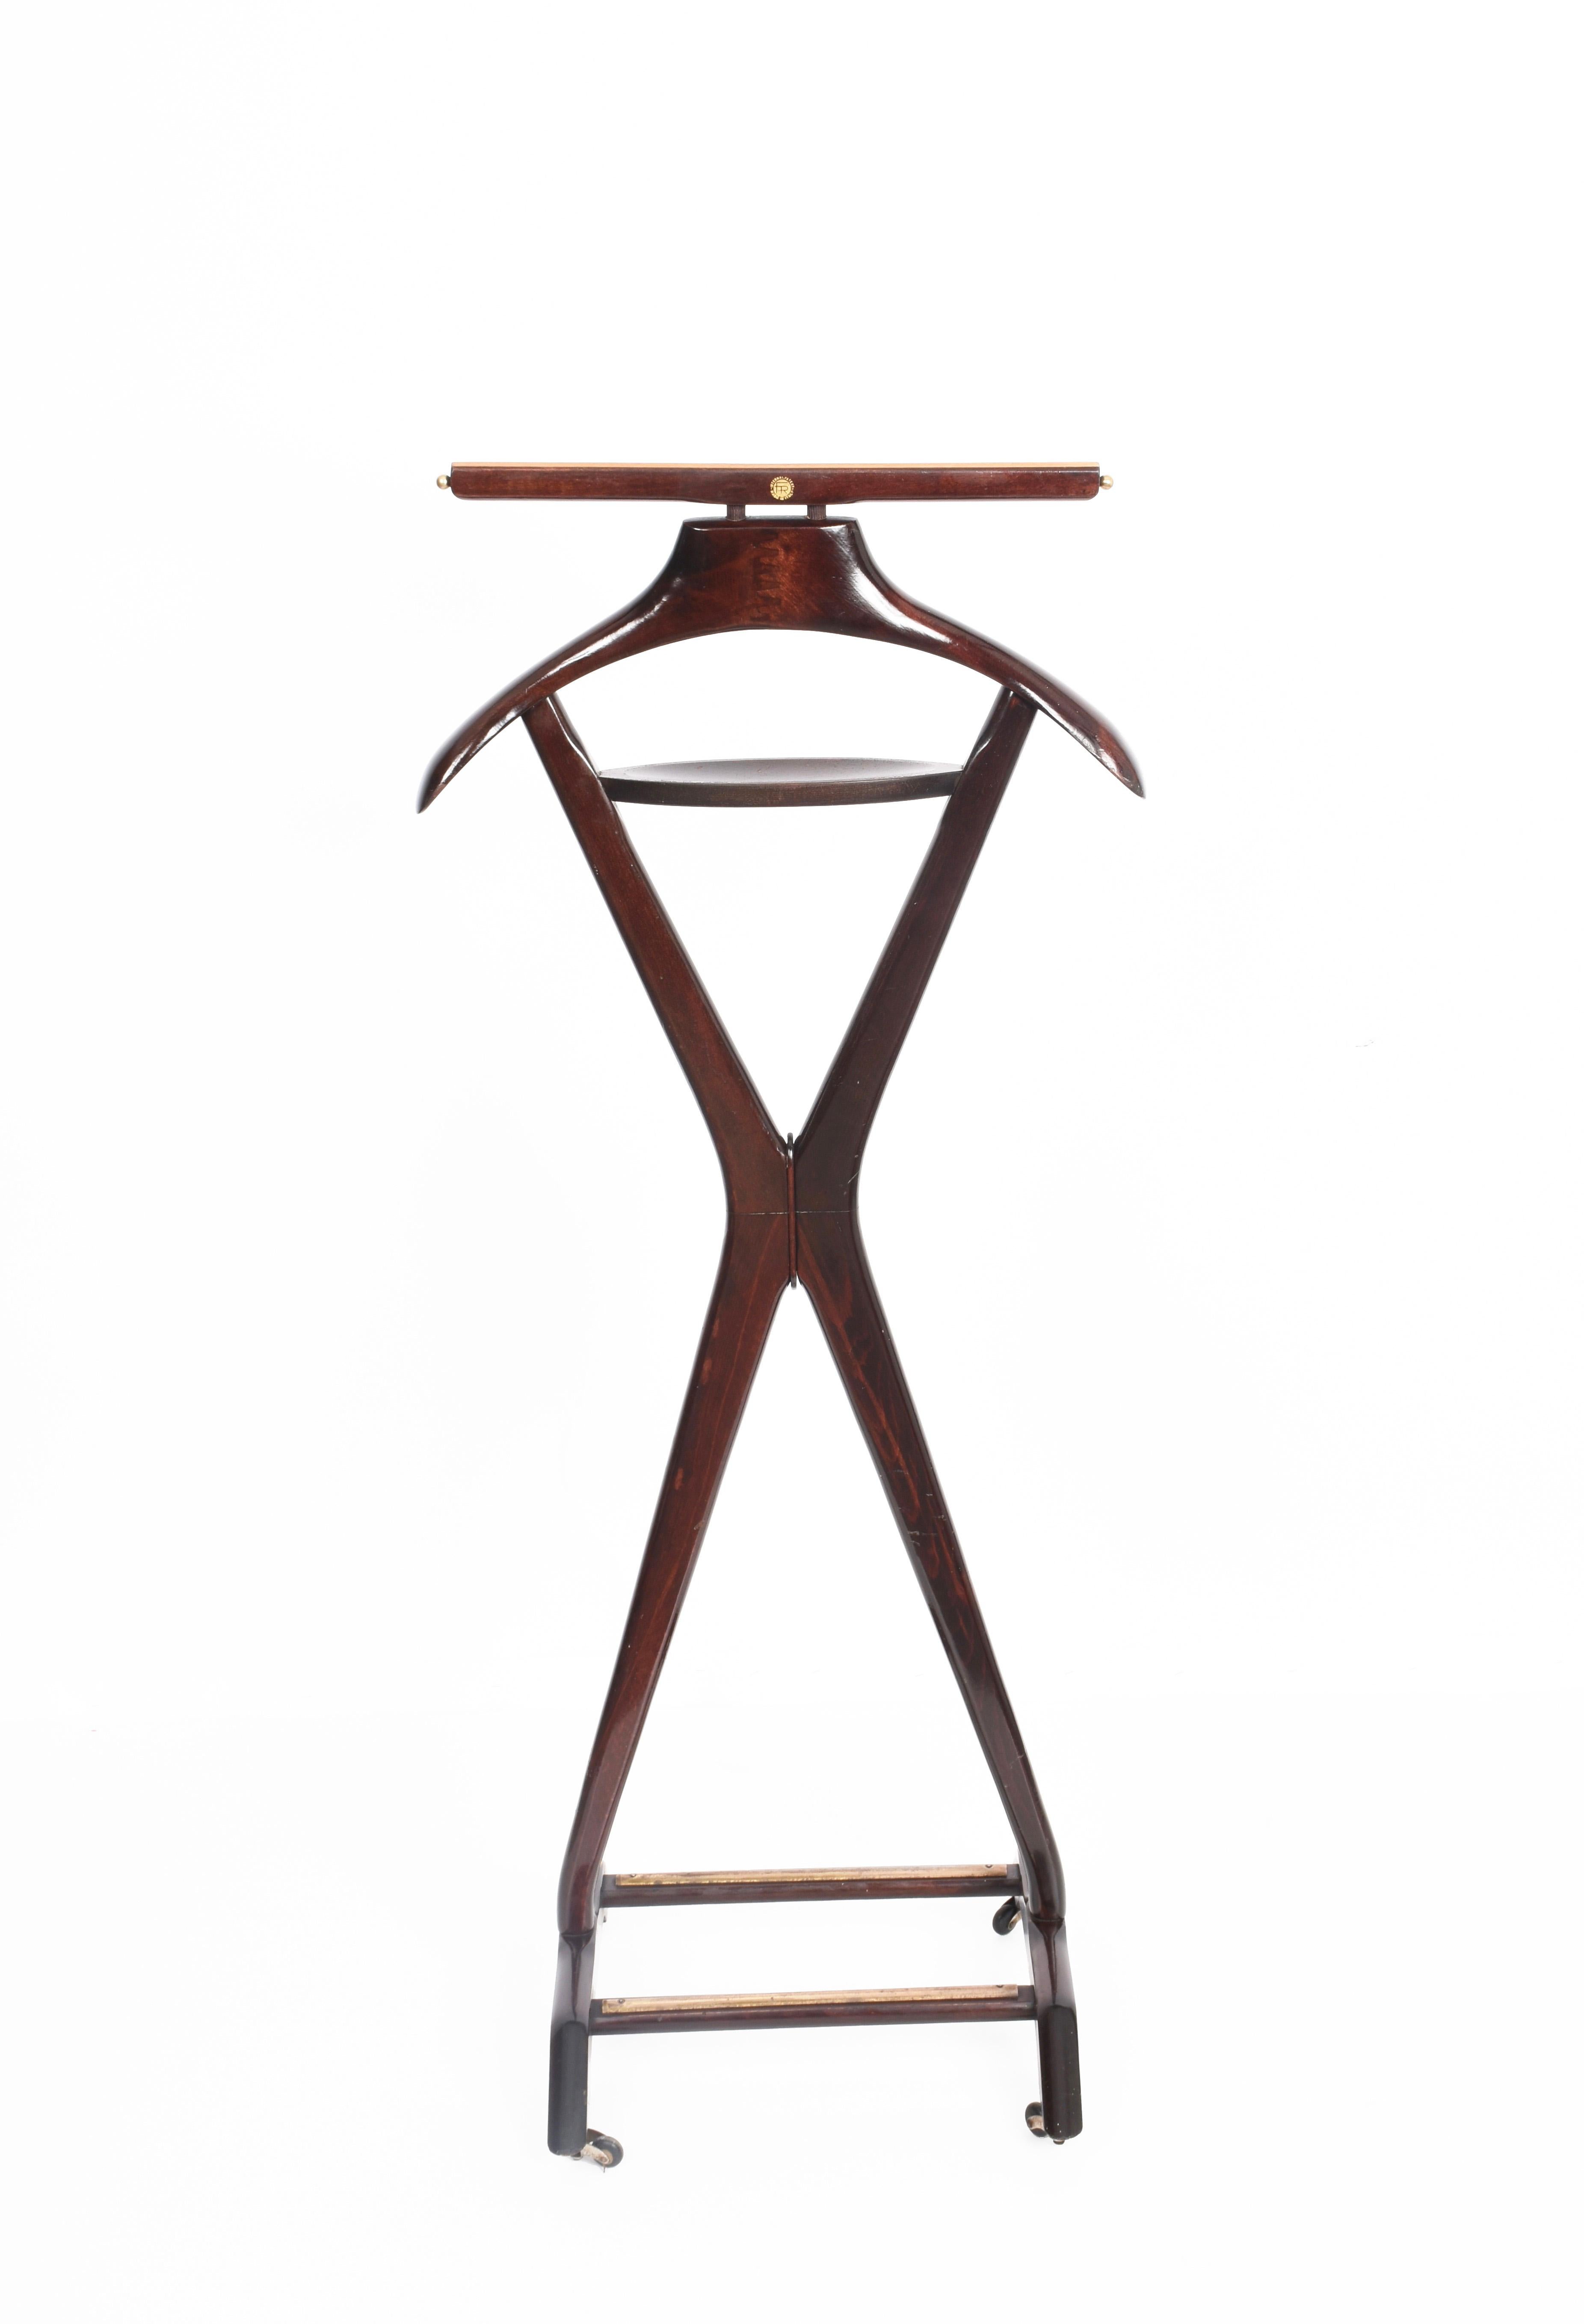 Extremely rare midcentury valet stand in beech and brass. This wonderful item was produced in the 1950s by the Reguitti Brothers in Italy.

This very rare coat rack is made of stained beechwood with a unique midcentury design with an intriguing